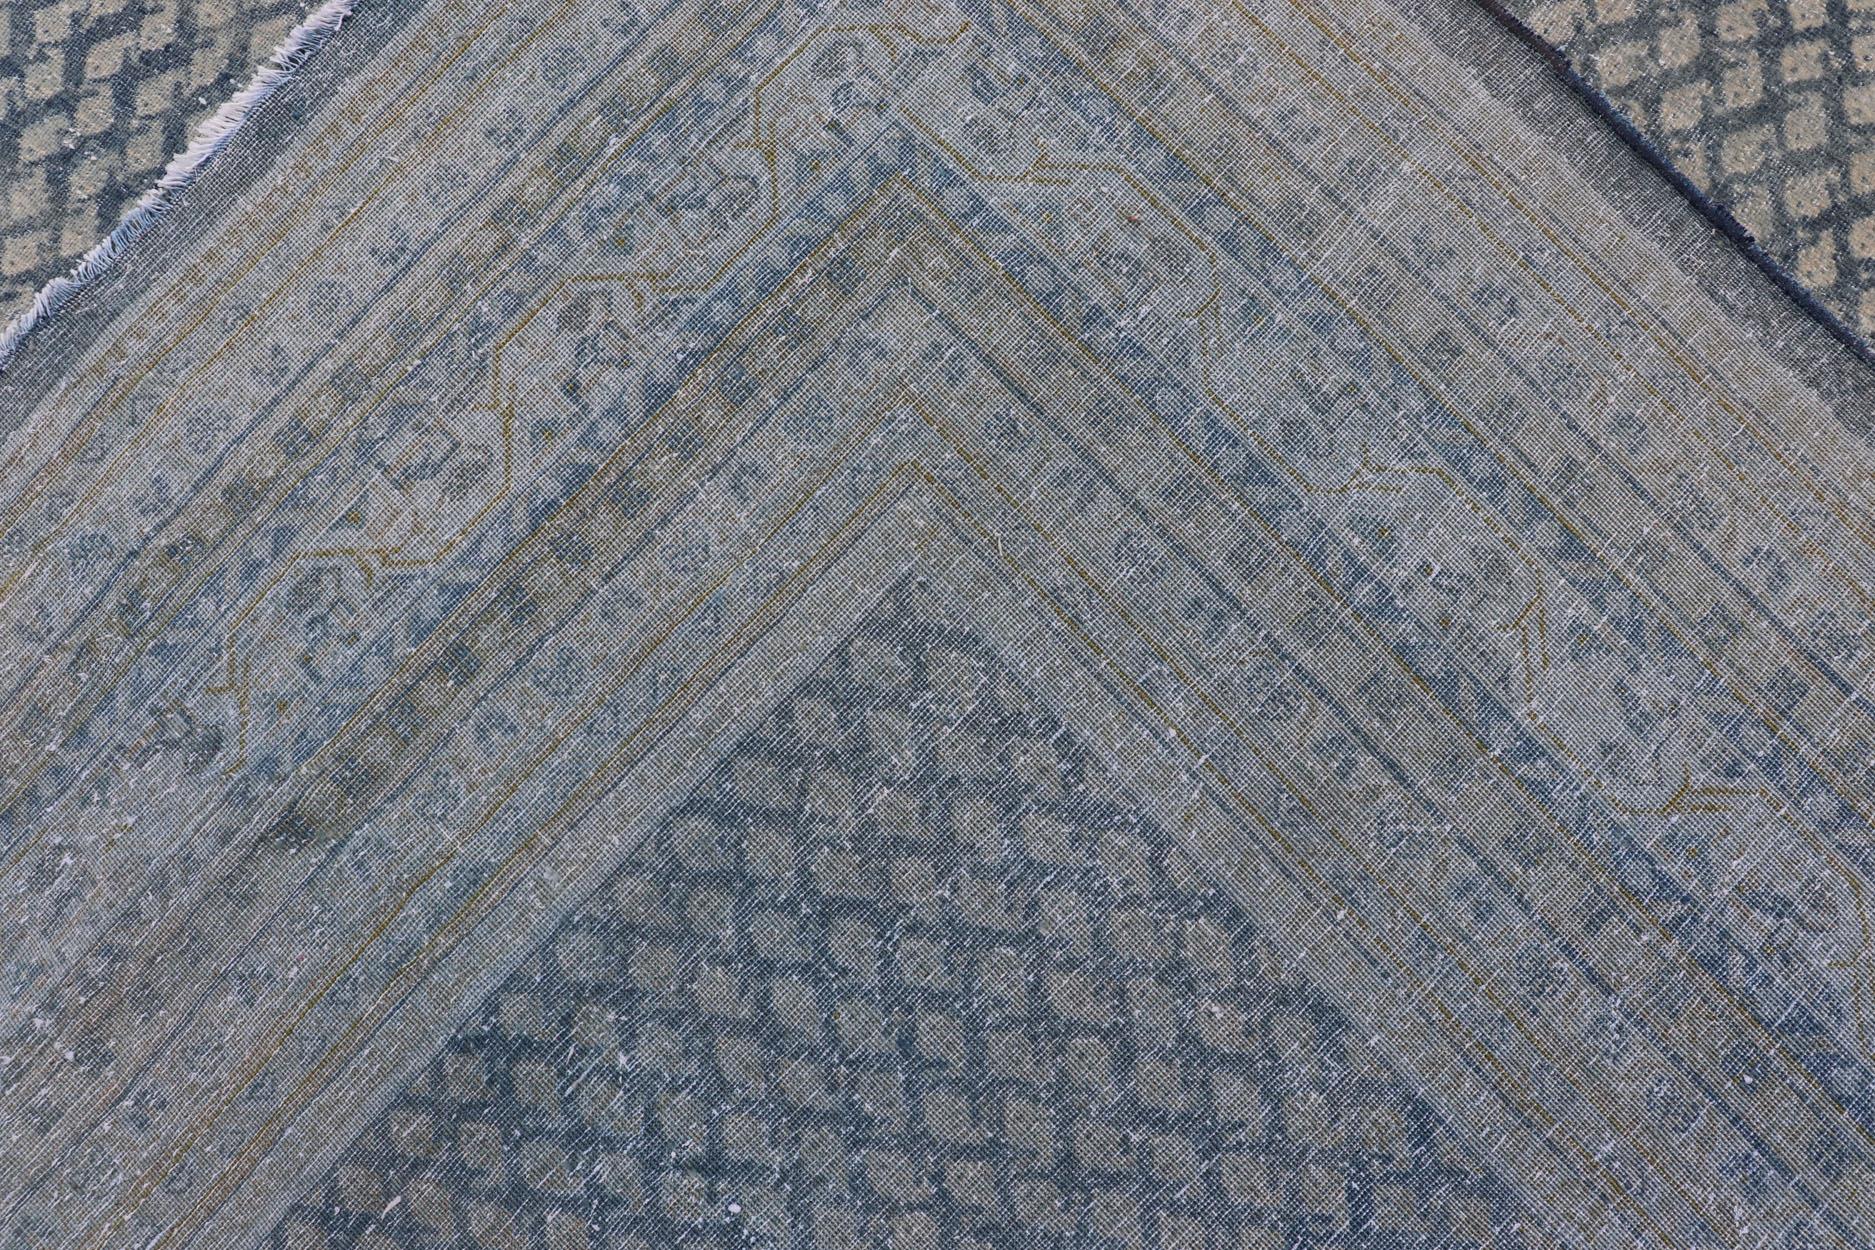 Minimalist Design Antique Persian Tabriz Rug with Modern Look in Blue Tones For Sale 4